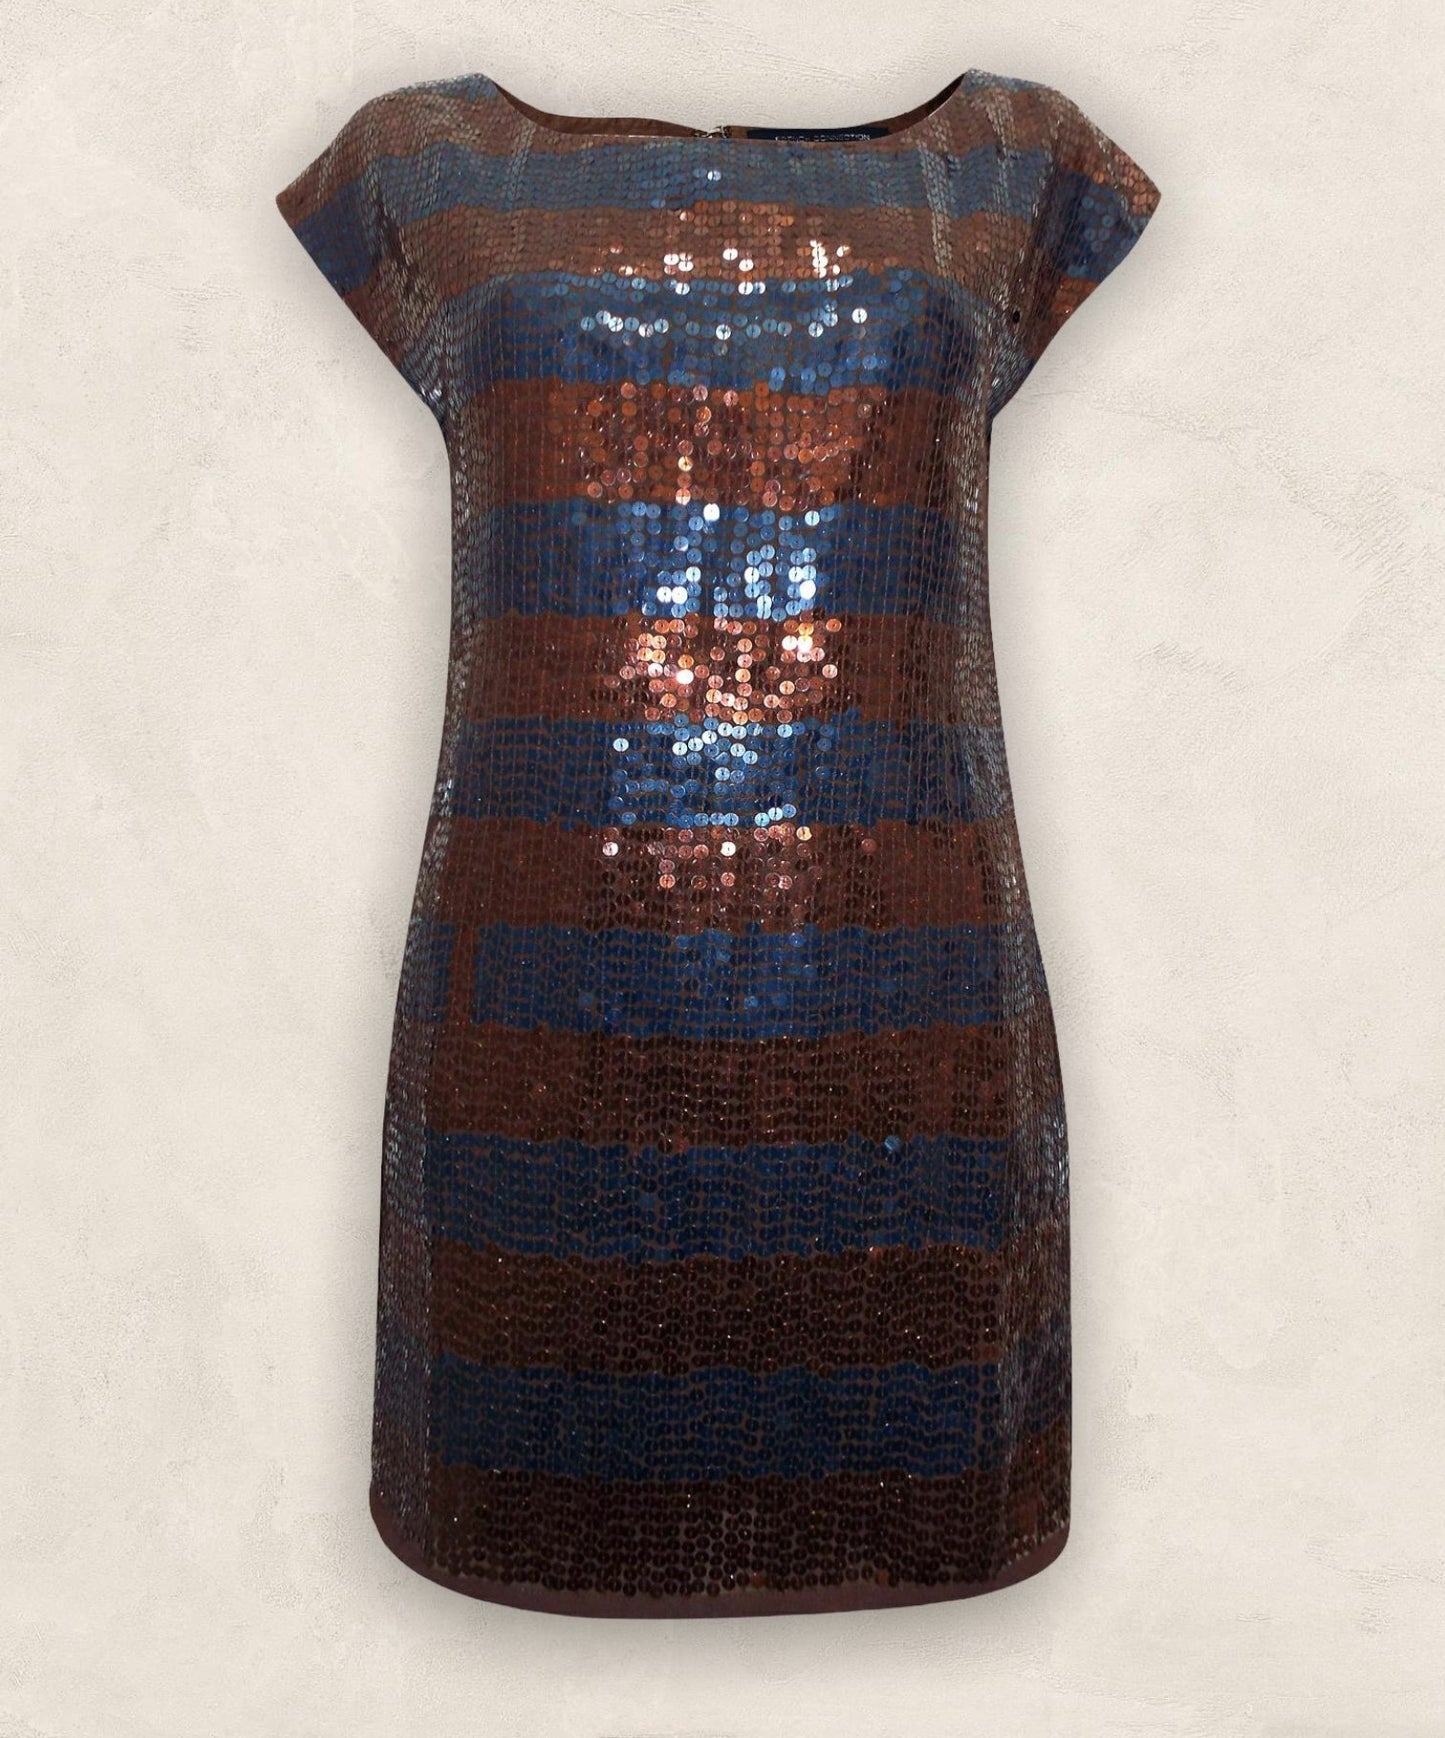 French Connection Copper & Ink Blue Striped Sequin Shift Dress UK 12 US 8 EU 40 Timeless Fashions